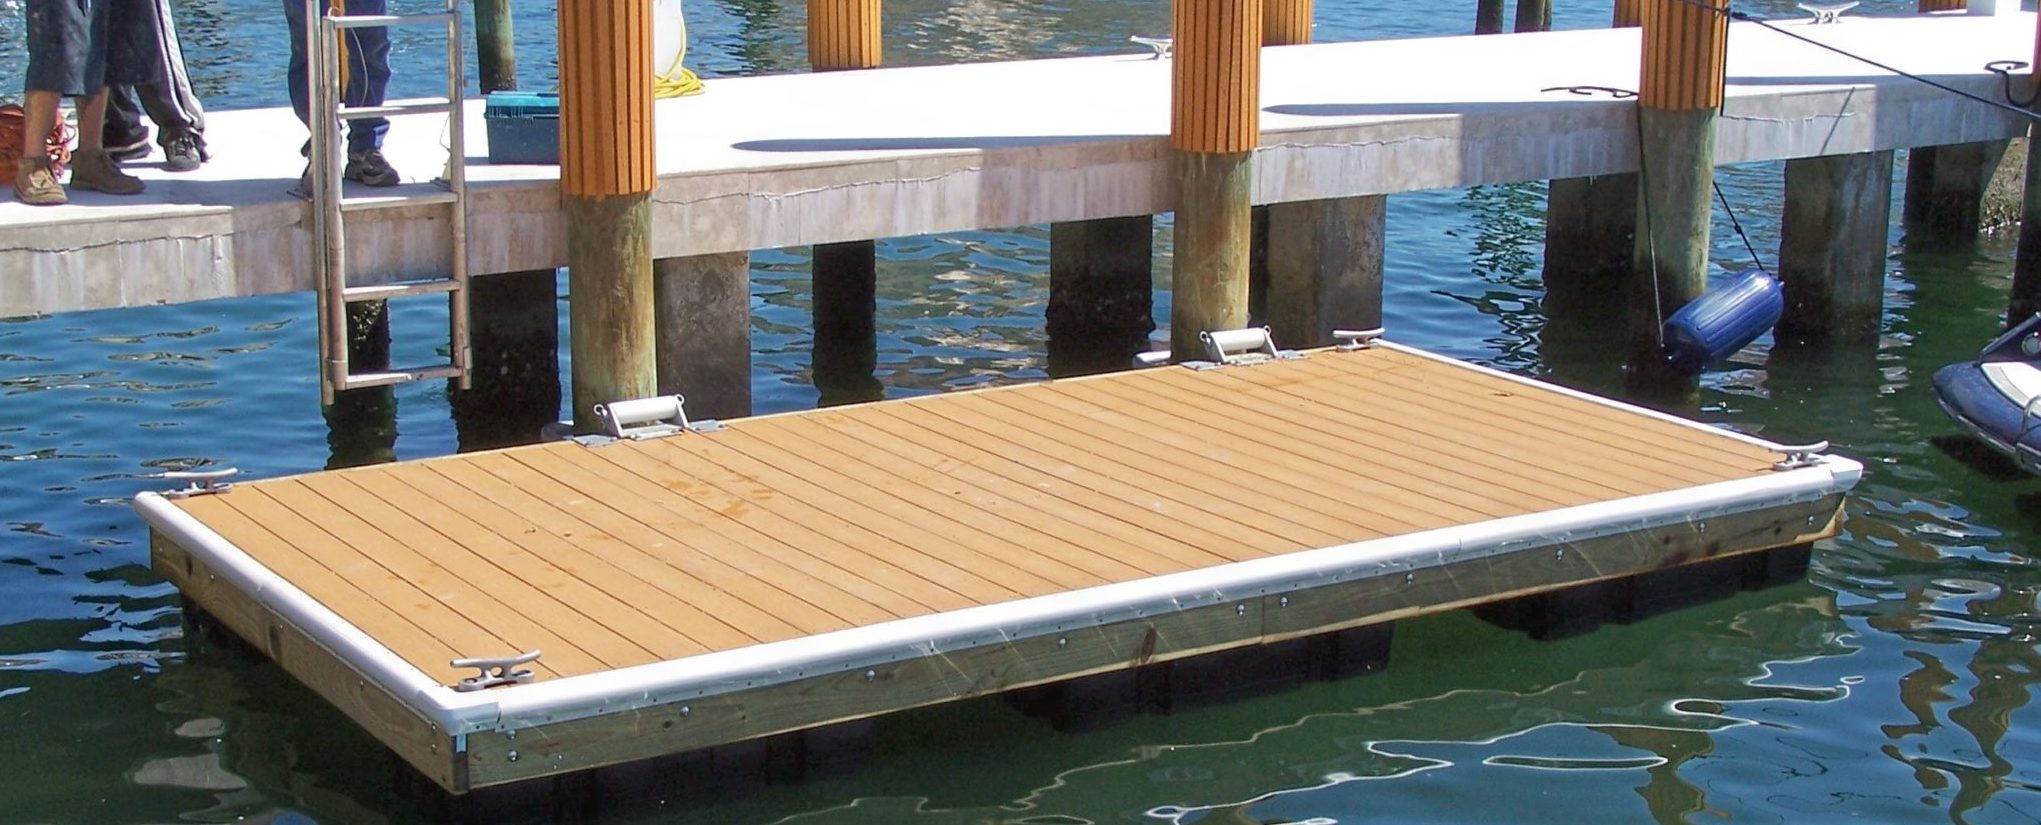 How to Stabilize a Floating Dock: 6 Methods - Haven Dock & Marine